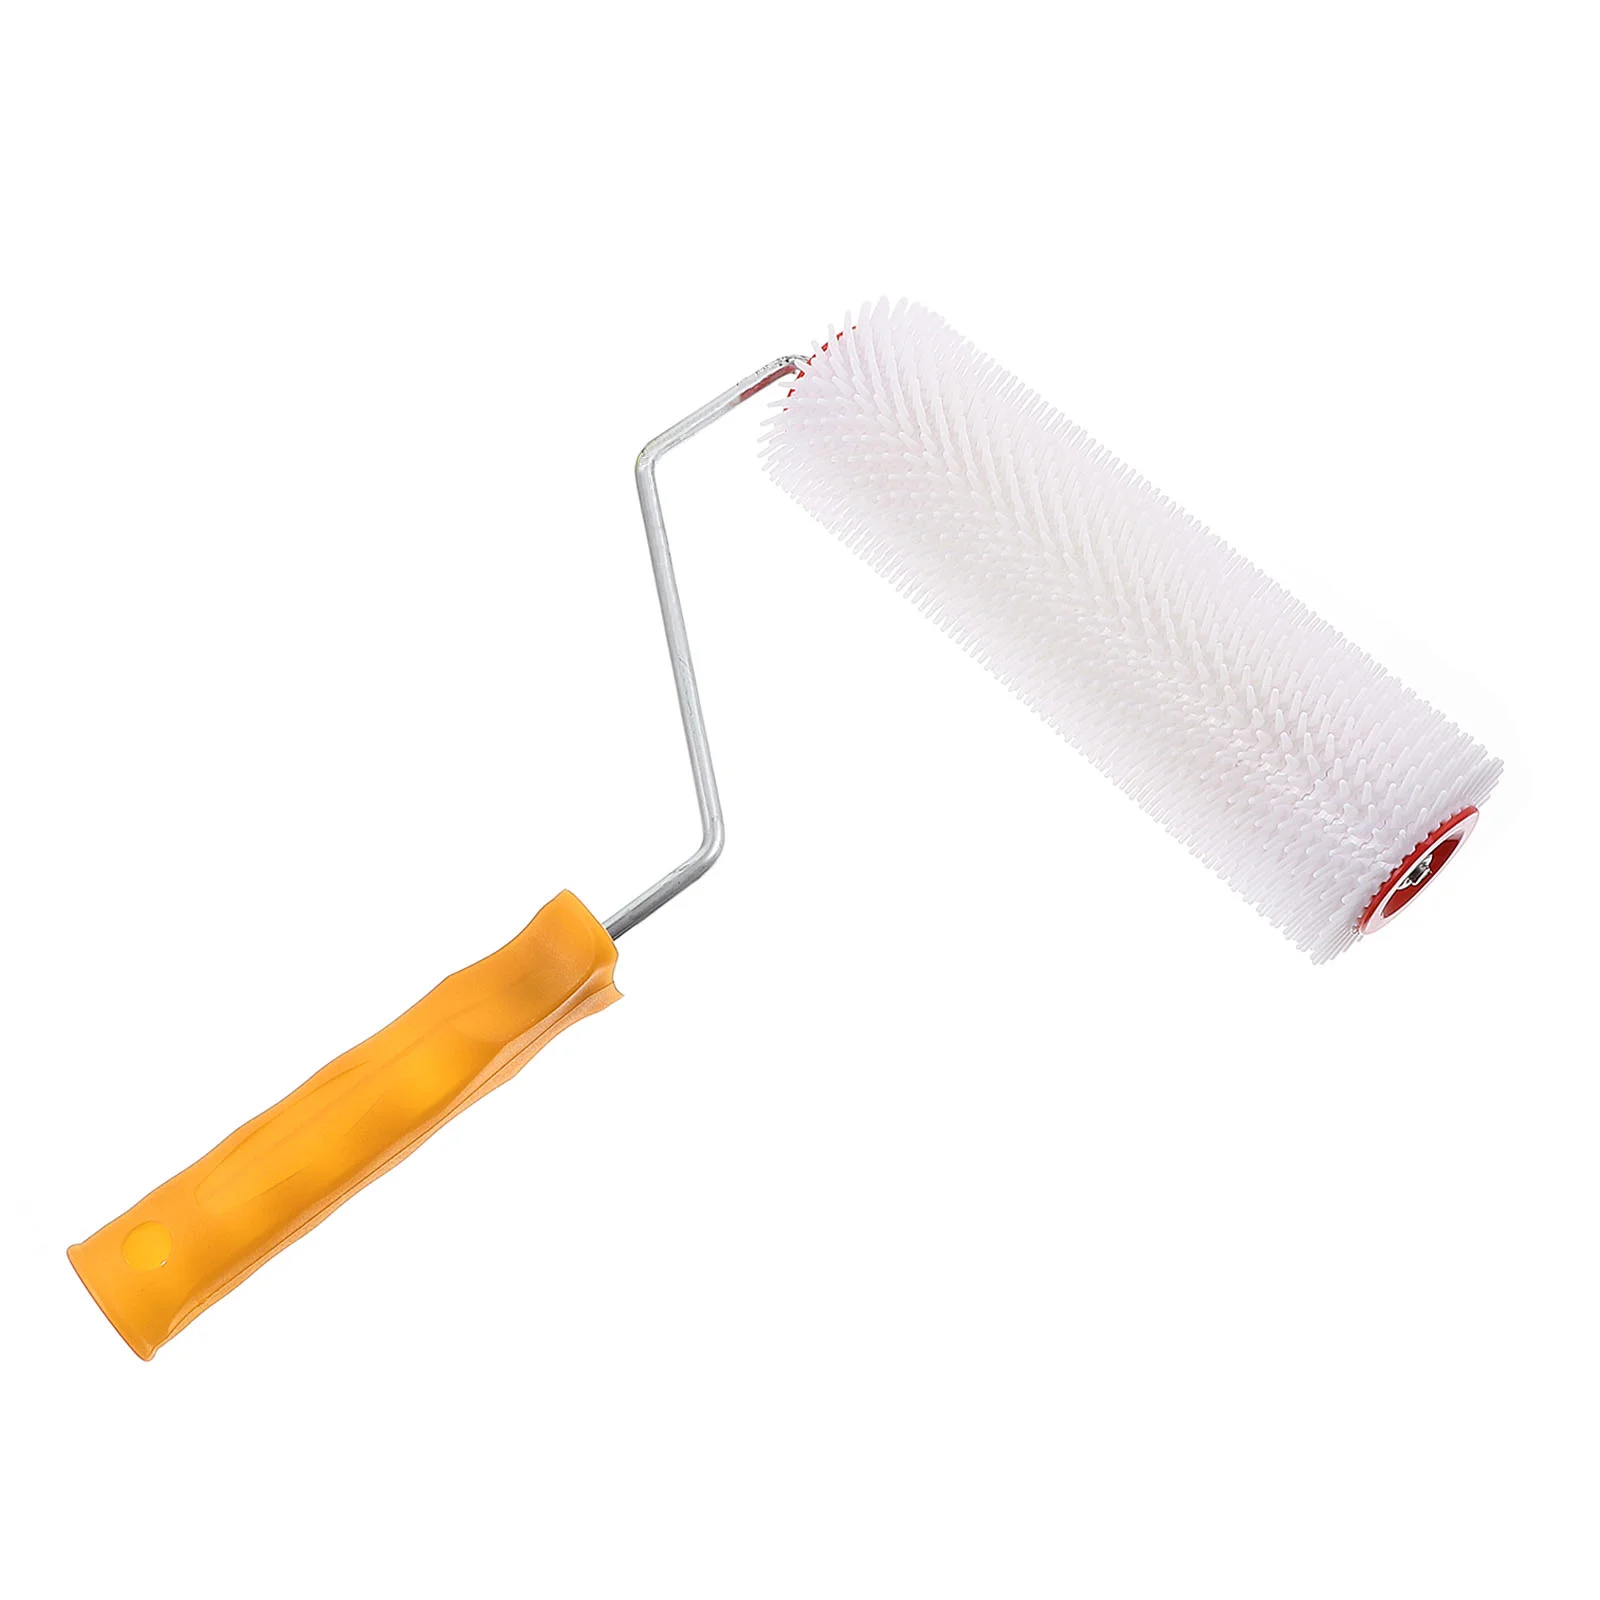 

Roller Spiked Self Leveling Screed Brush Screeding Aeration Latex Floor House Wall Tool Sponge Vent